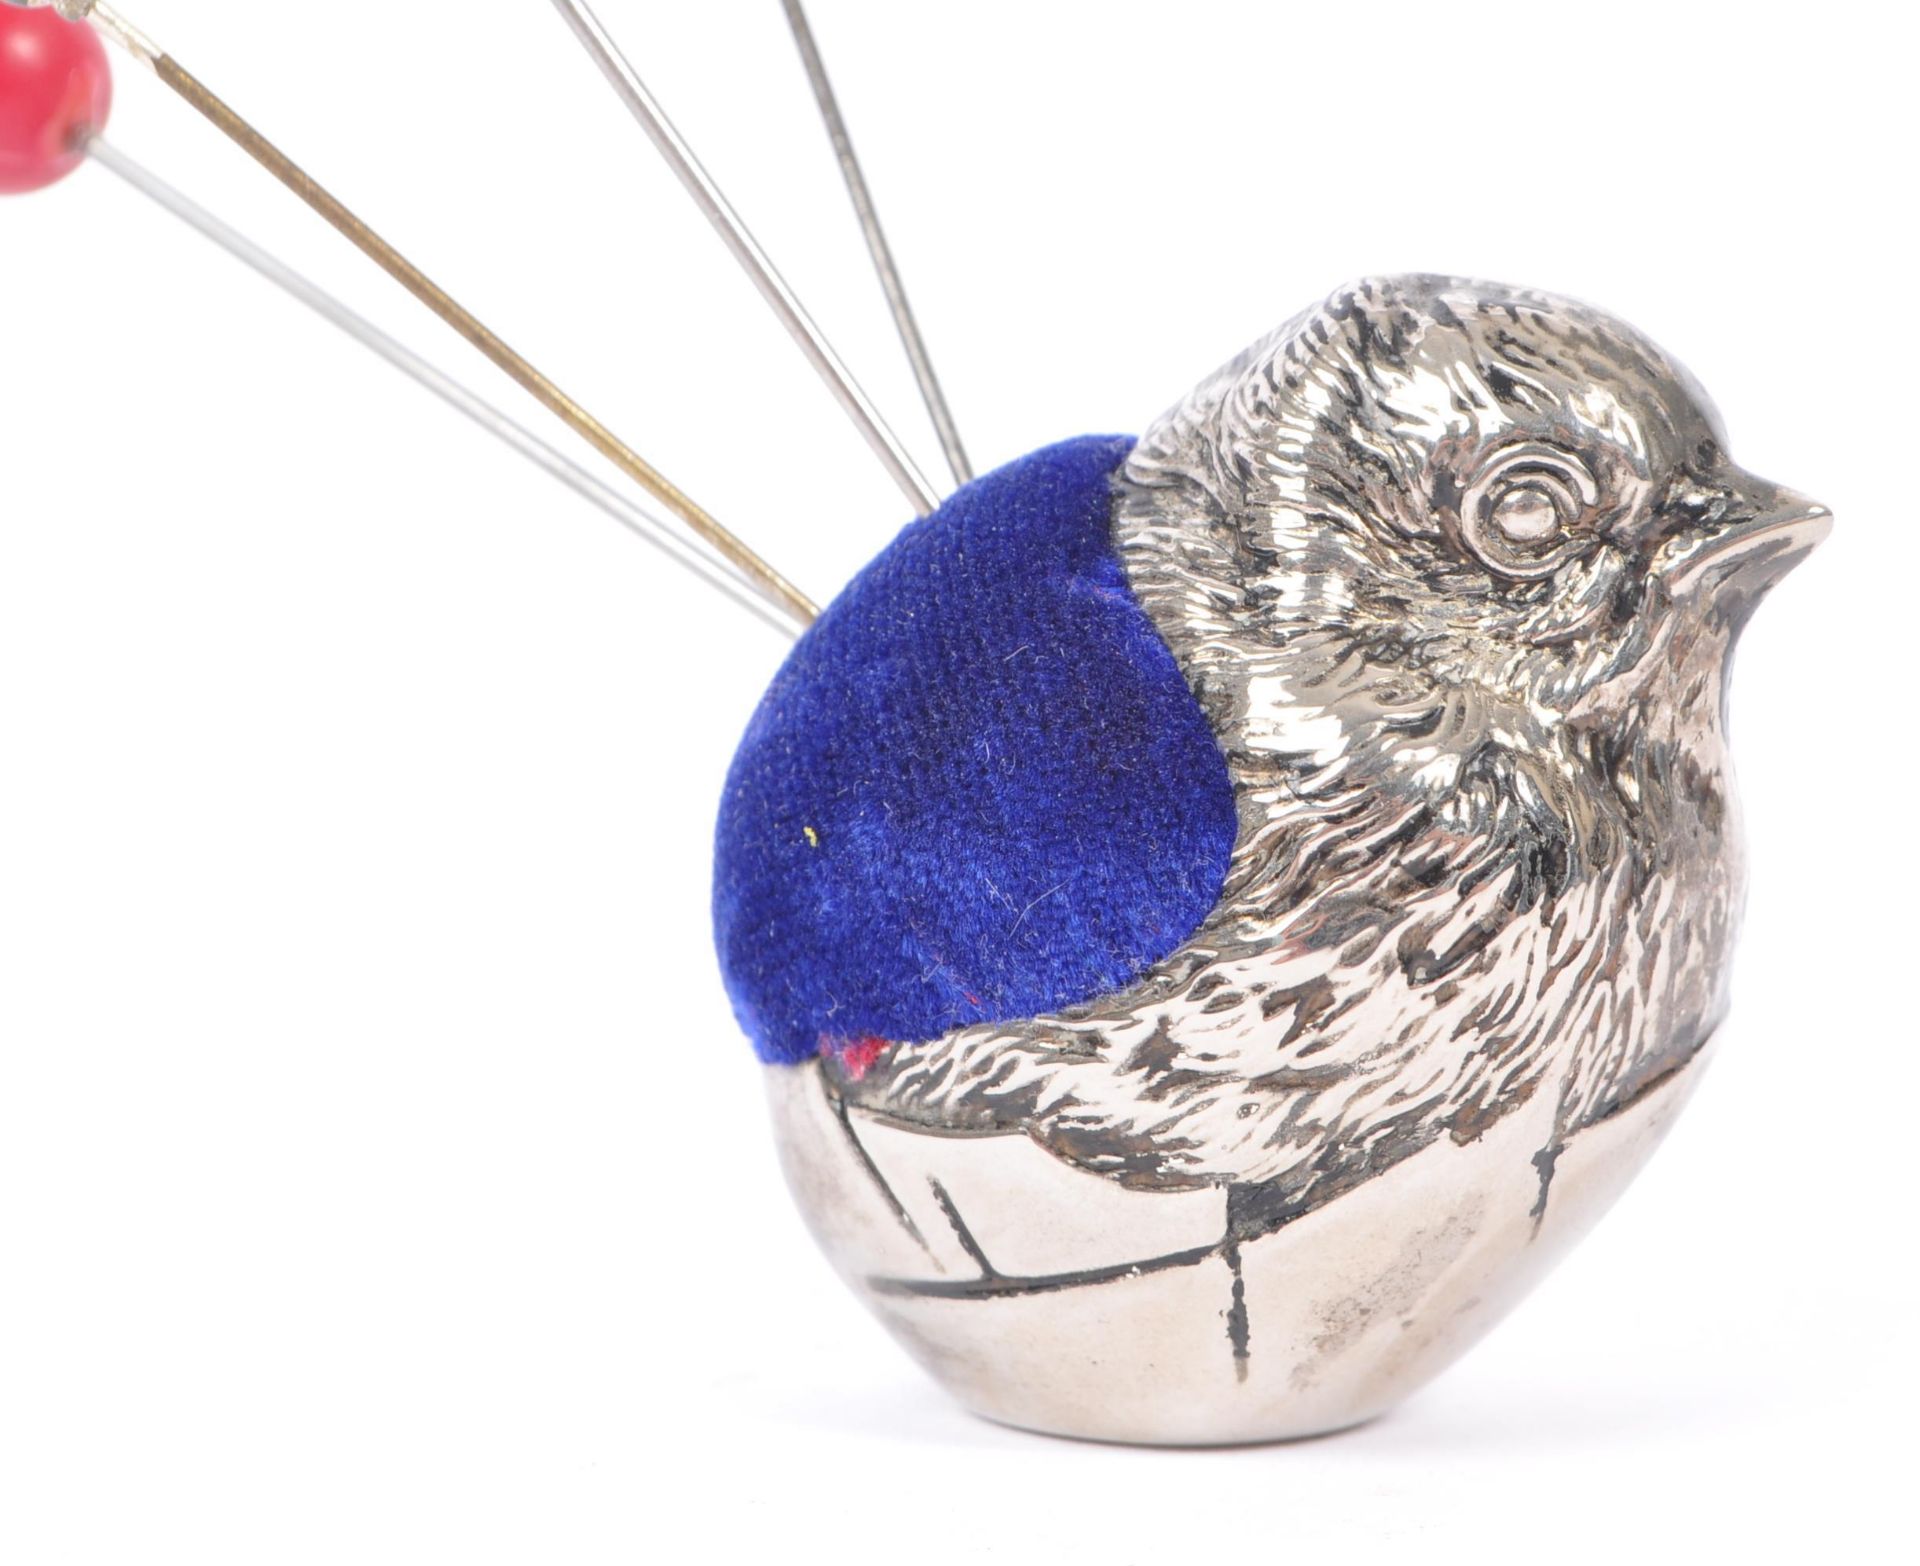 SILVER PLATED CHICK PIN CUSHION WITH HAT PINS - Image 4 of 5